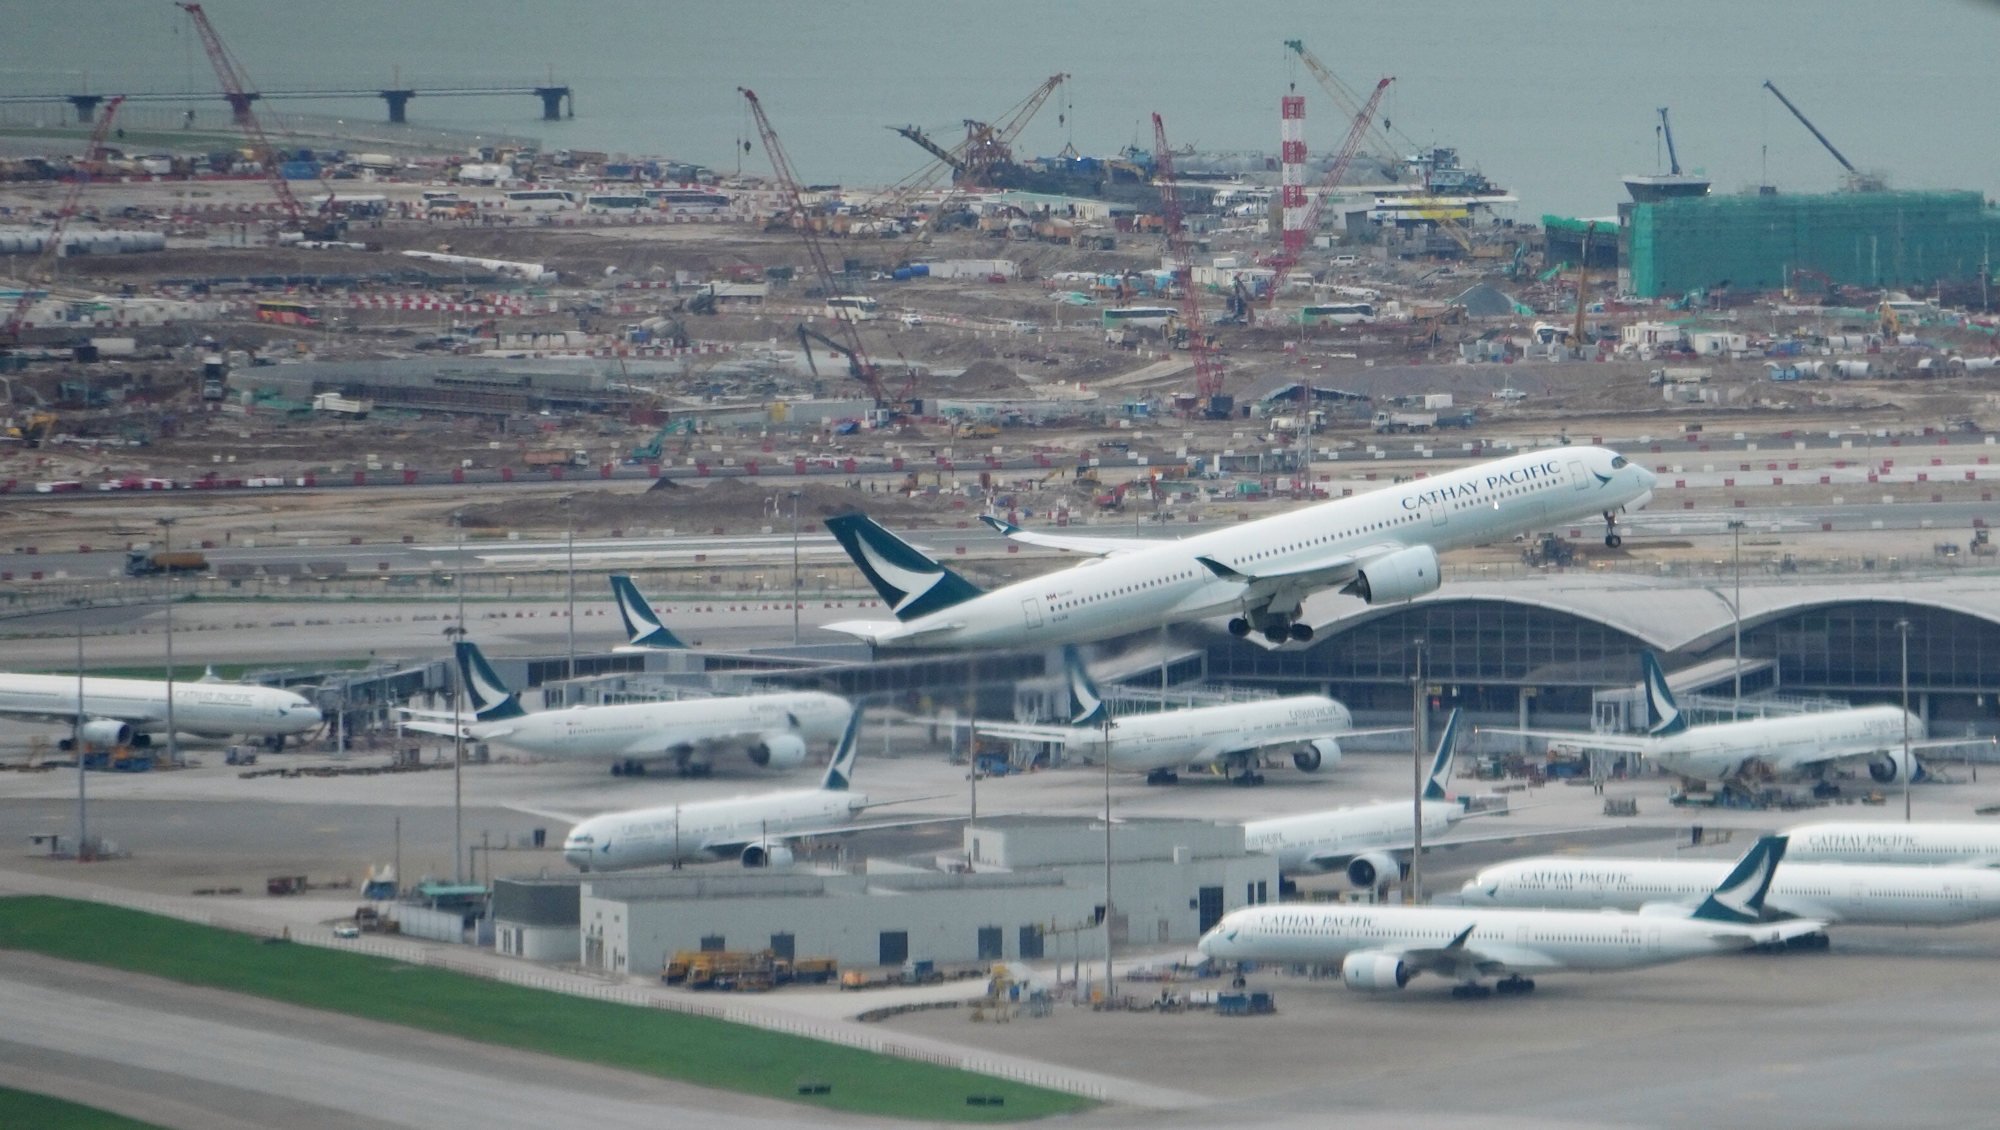 The Hong Kong government took part in Cathay Pacific’s HK$39 billion (US$5.2 billion) rescue plan in 2020. Photo: Eugene Lee